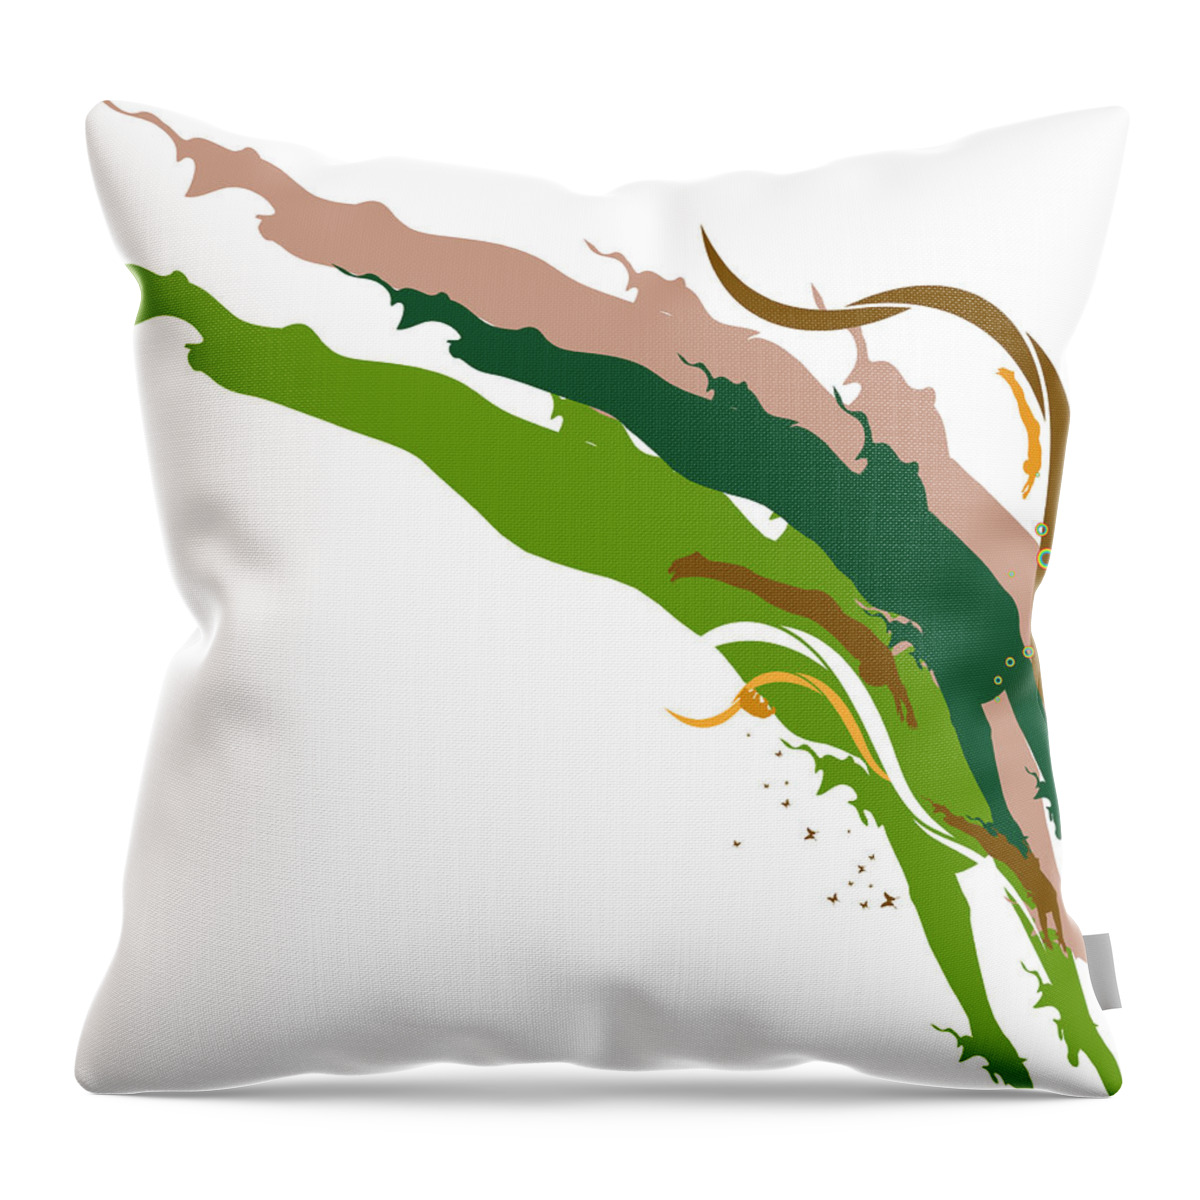 Diving Into Water Throw Pillow featuring the digital art Sculpture,moulding Art #1 by Best View Stock